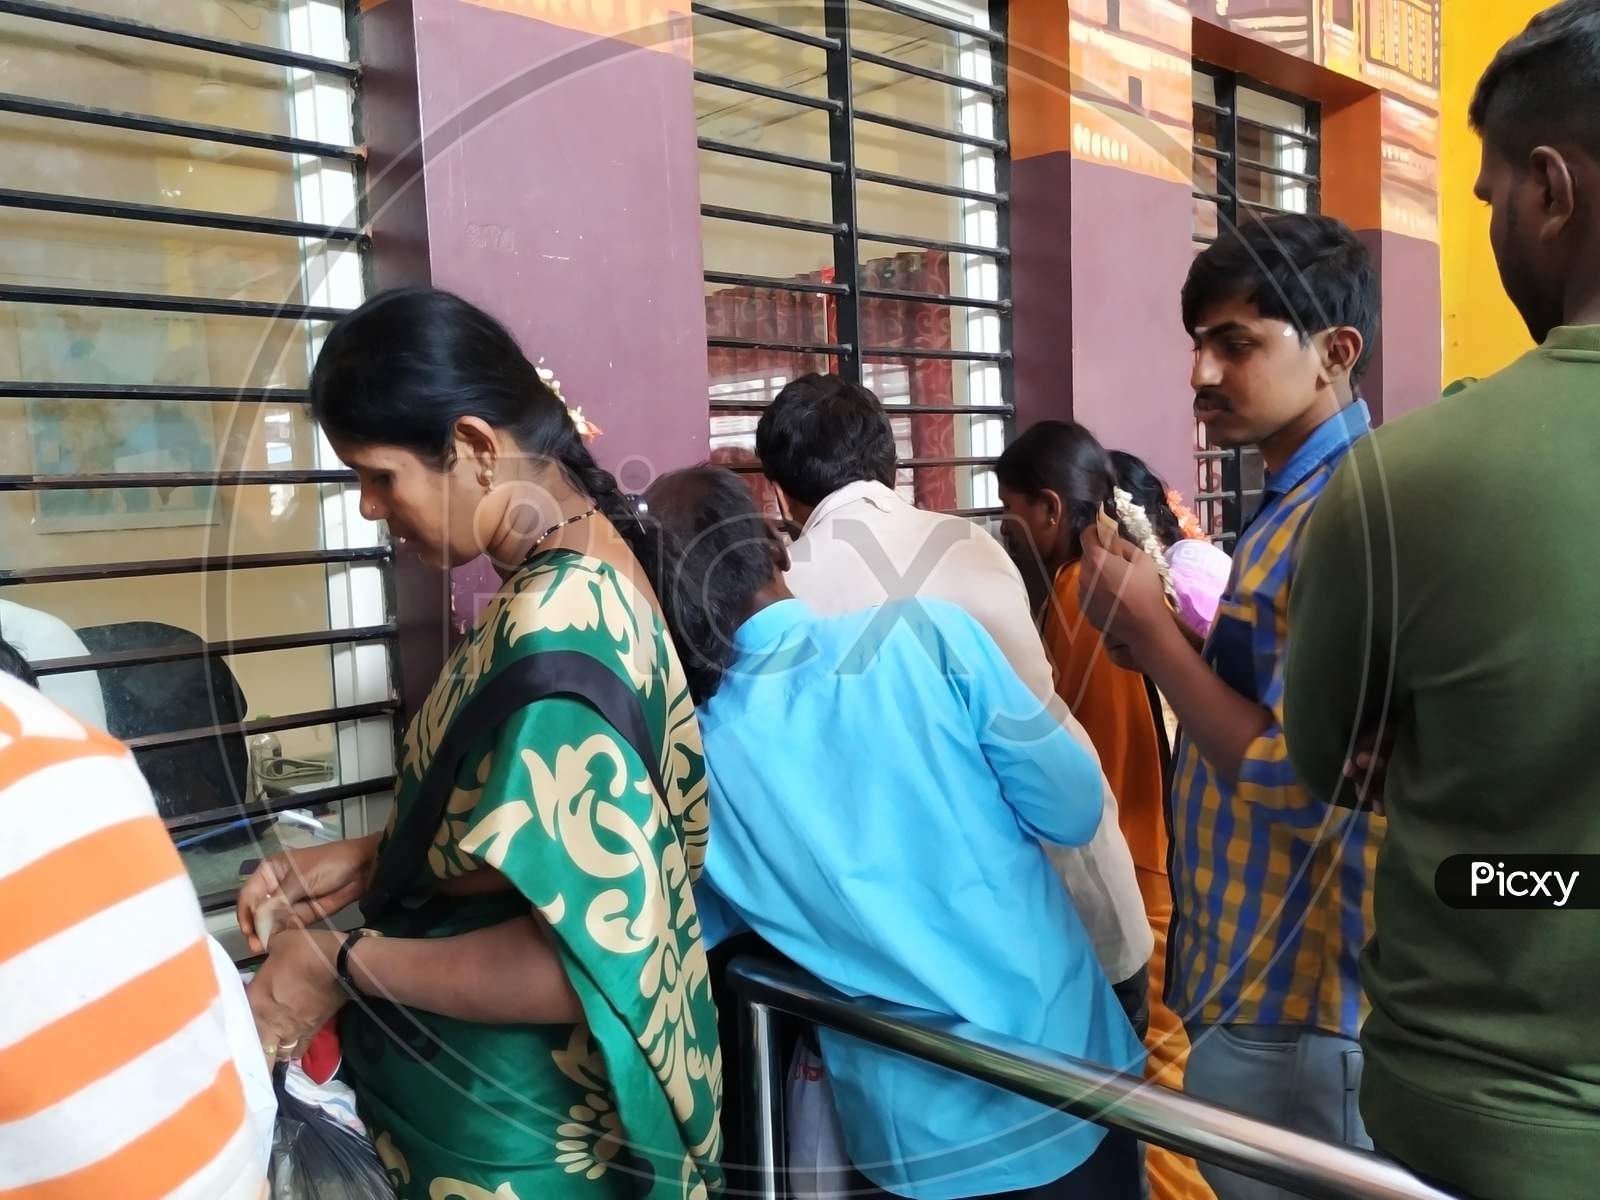 Interior Design Of Pandavapura Railway Station Ticket Counter And People In The Queue To Purchase Ticket